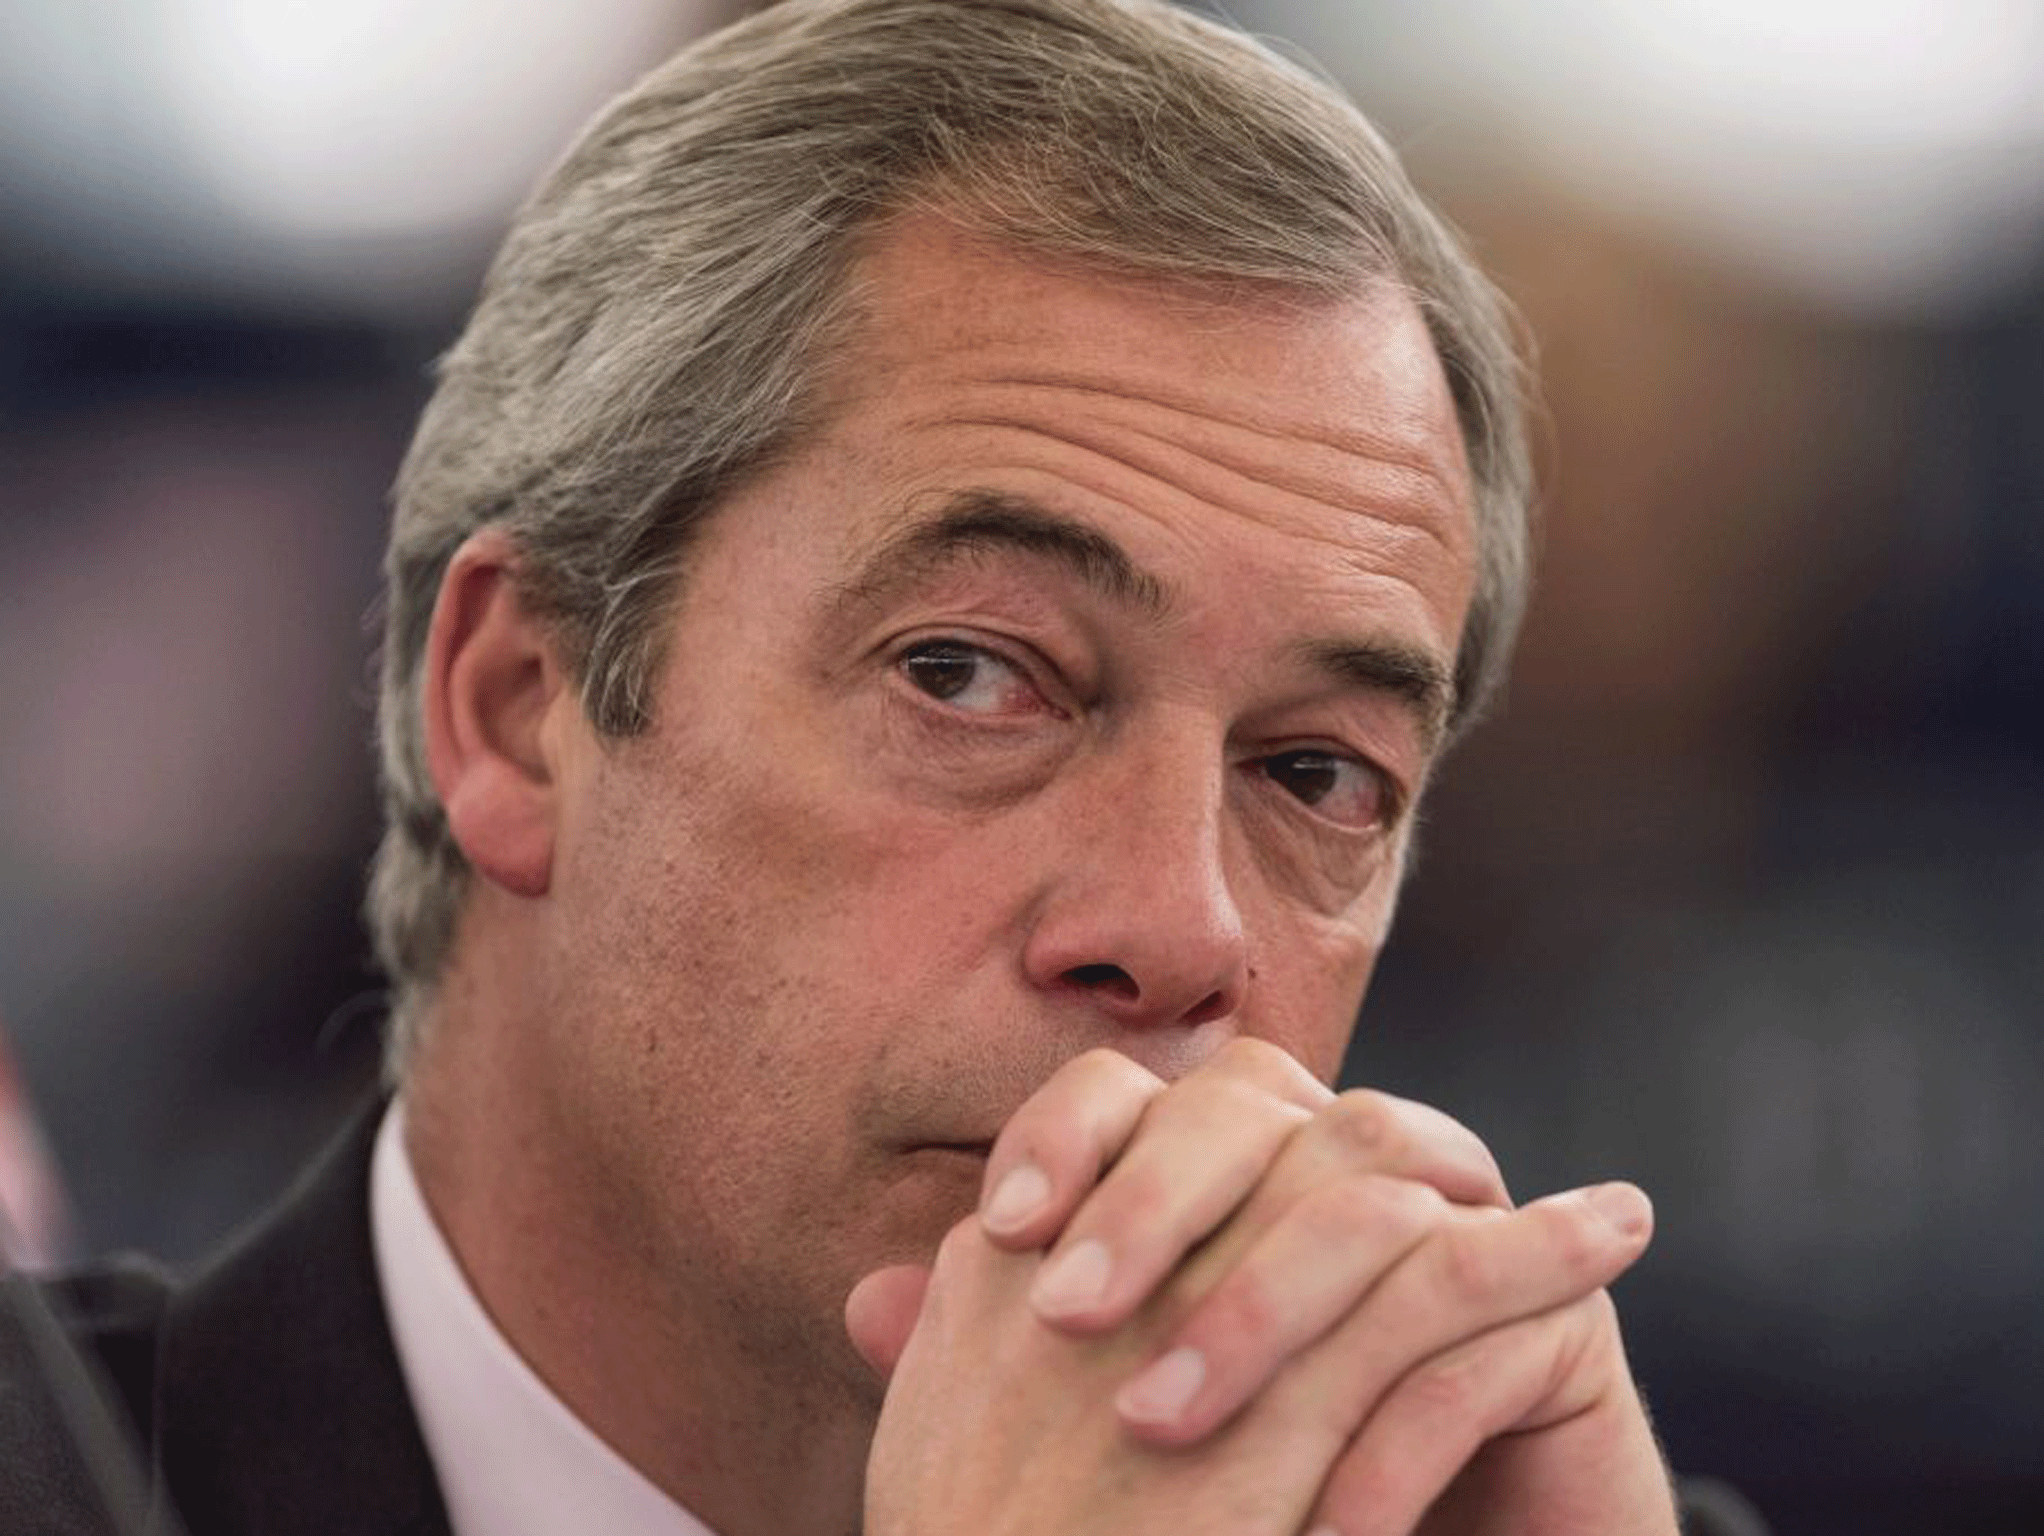 Nigel Farage, British Member of the European Parliament and former leader of the UK Independence Party